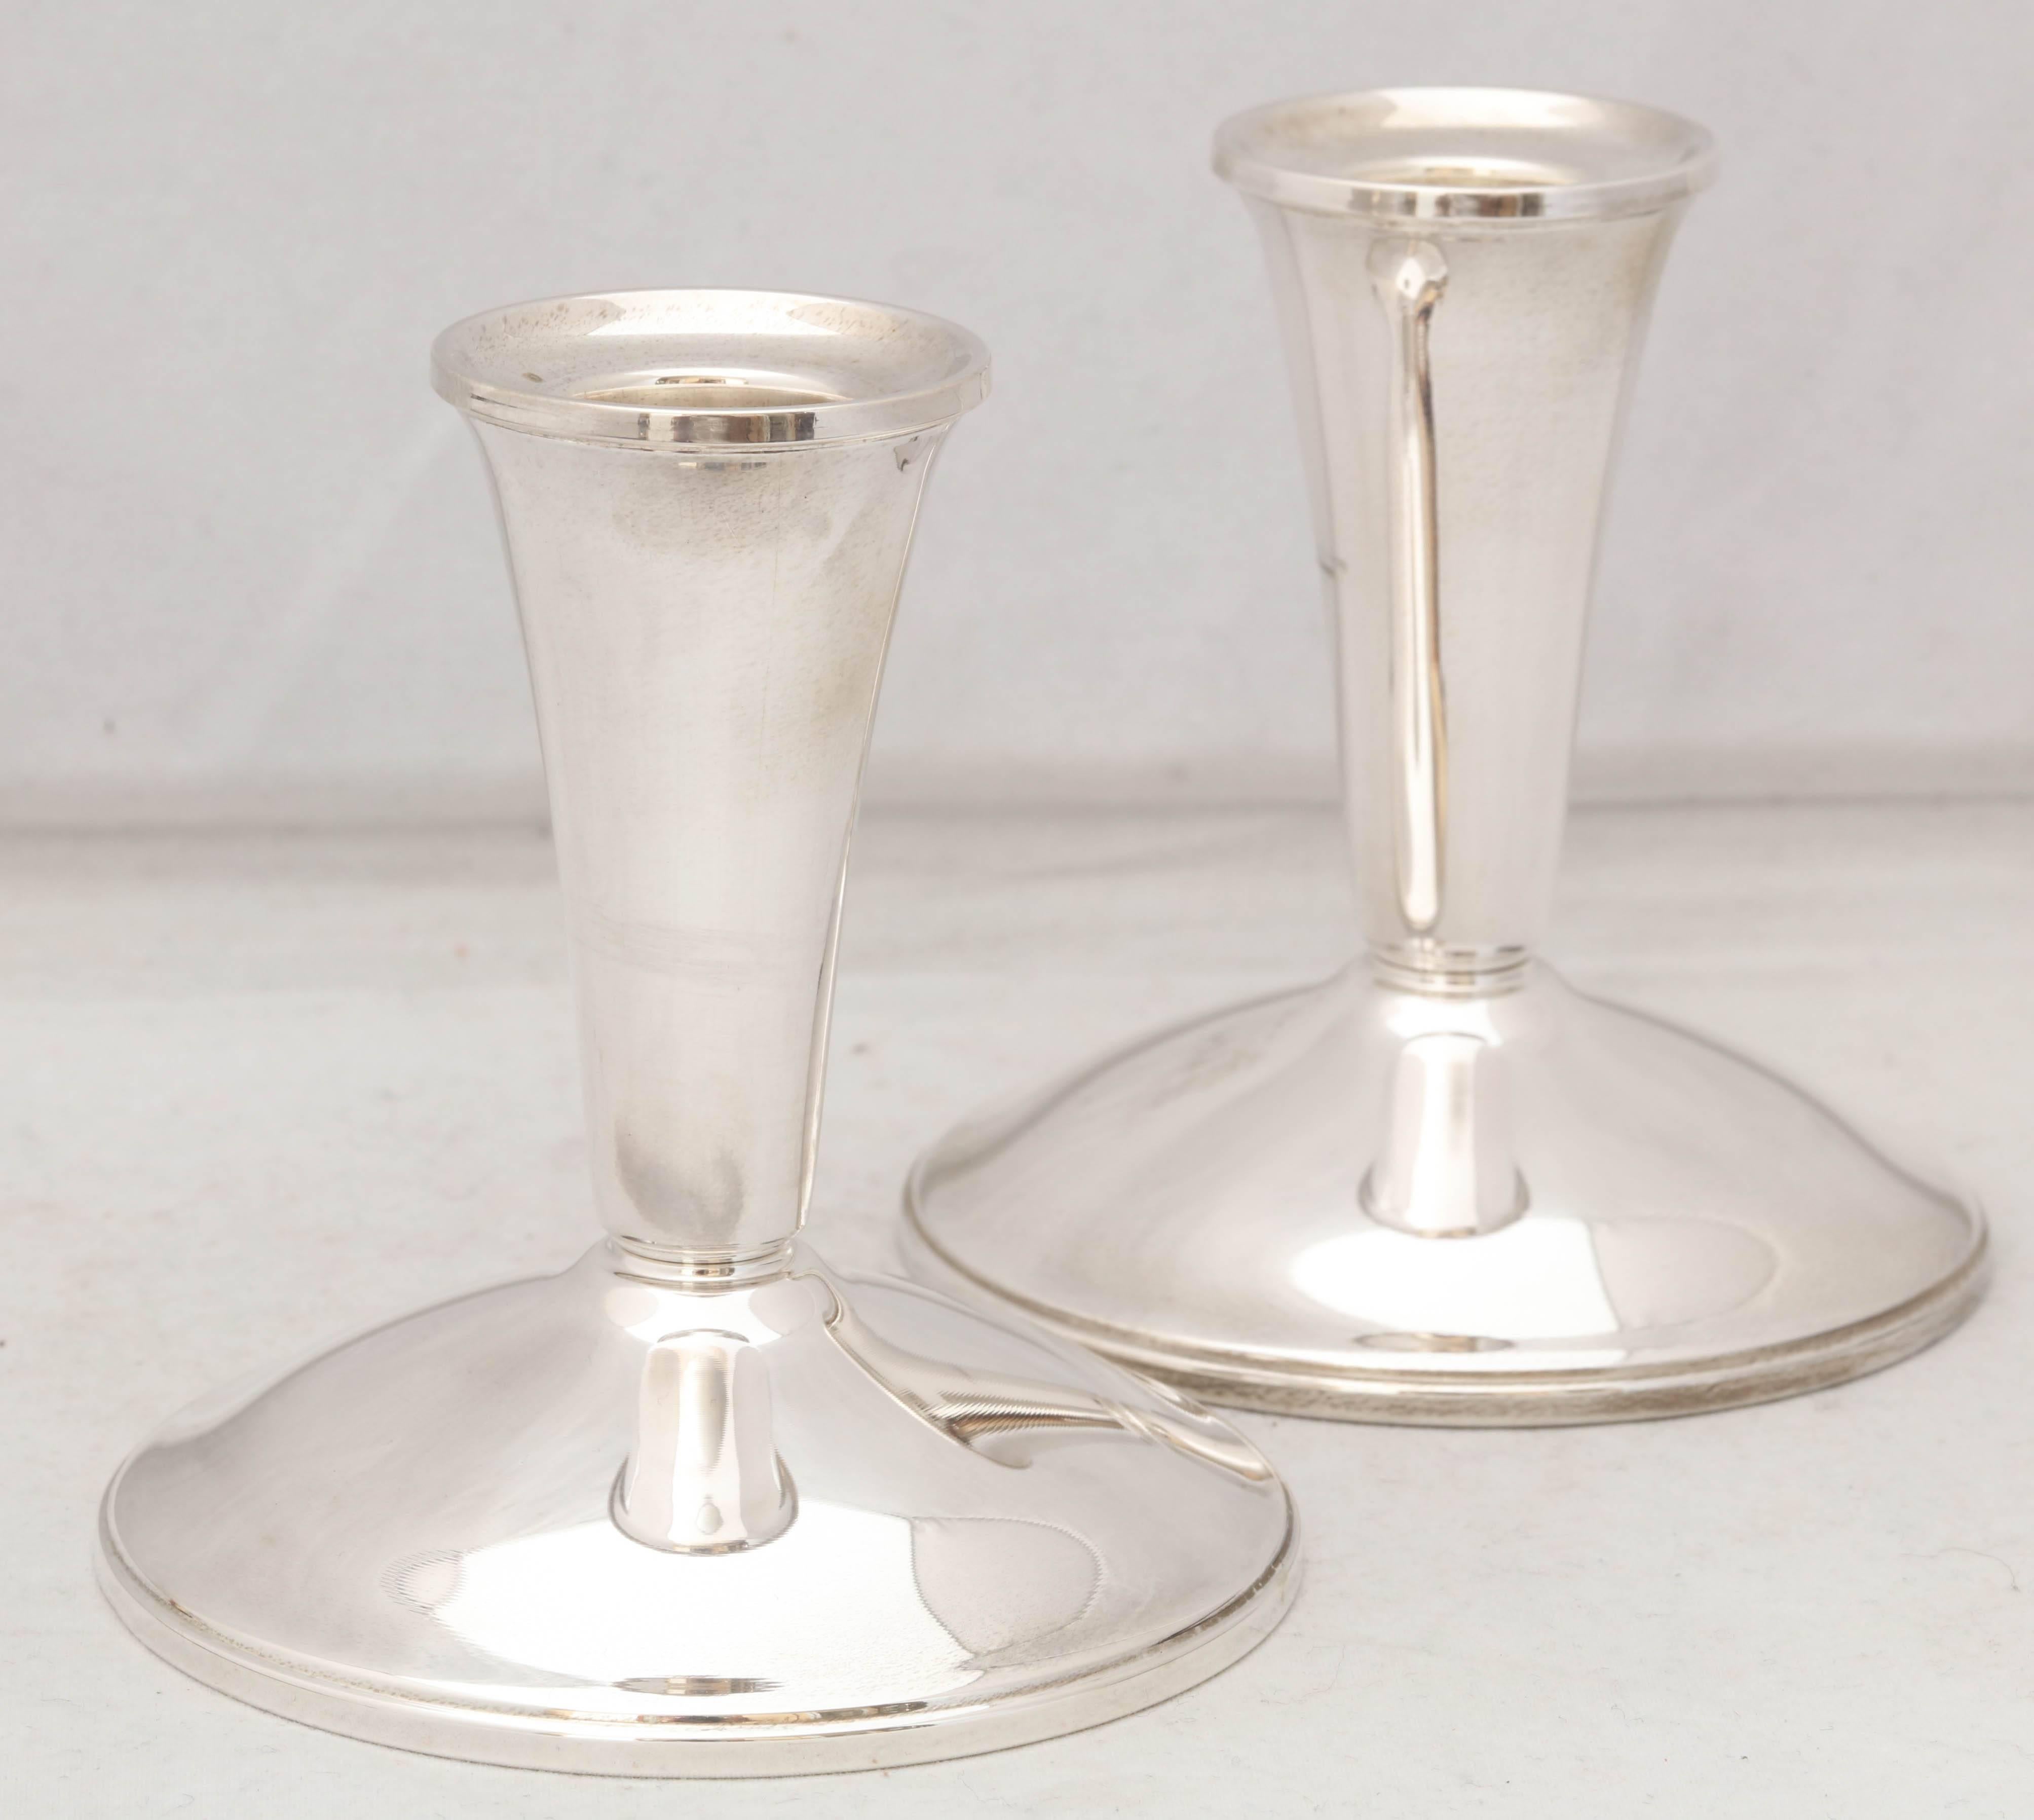 Pair of sterling silver, Mid-Century Modern candlesticks, The Alvin Silver Manufacturing Company, Providence, Rhode Island, circa 1950s. @4